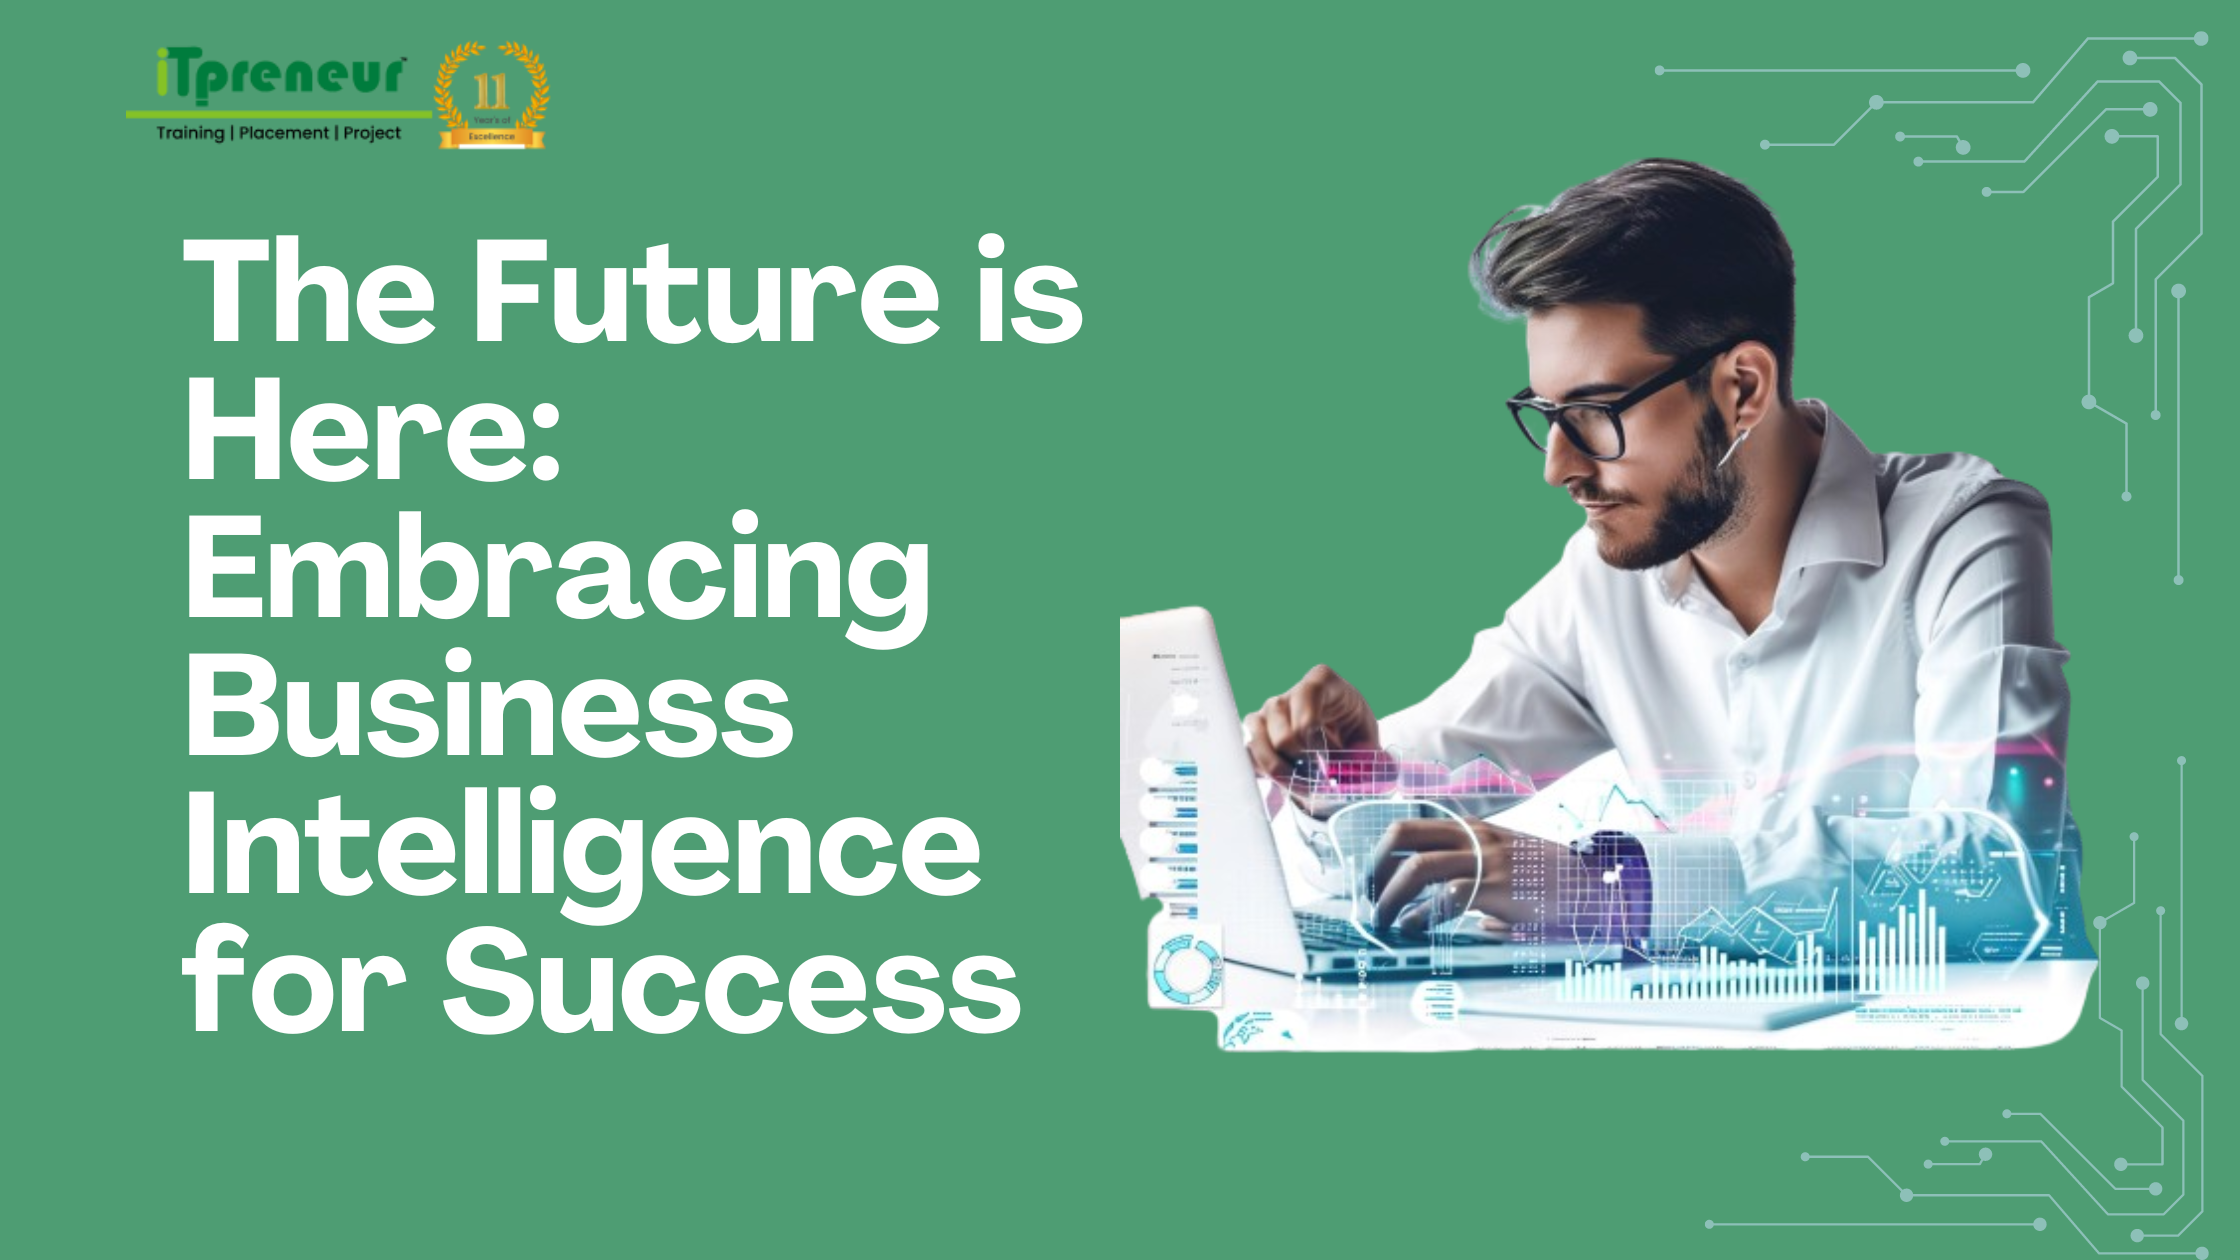 The Future is Here: Embracing Business Intelligence for Success